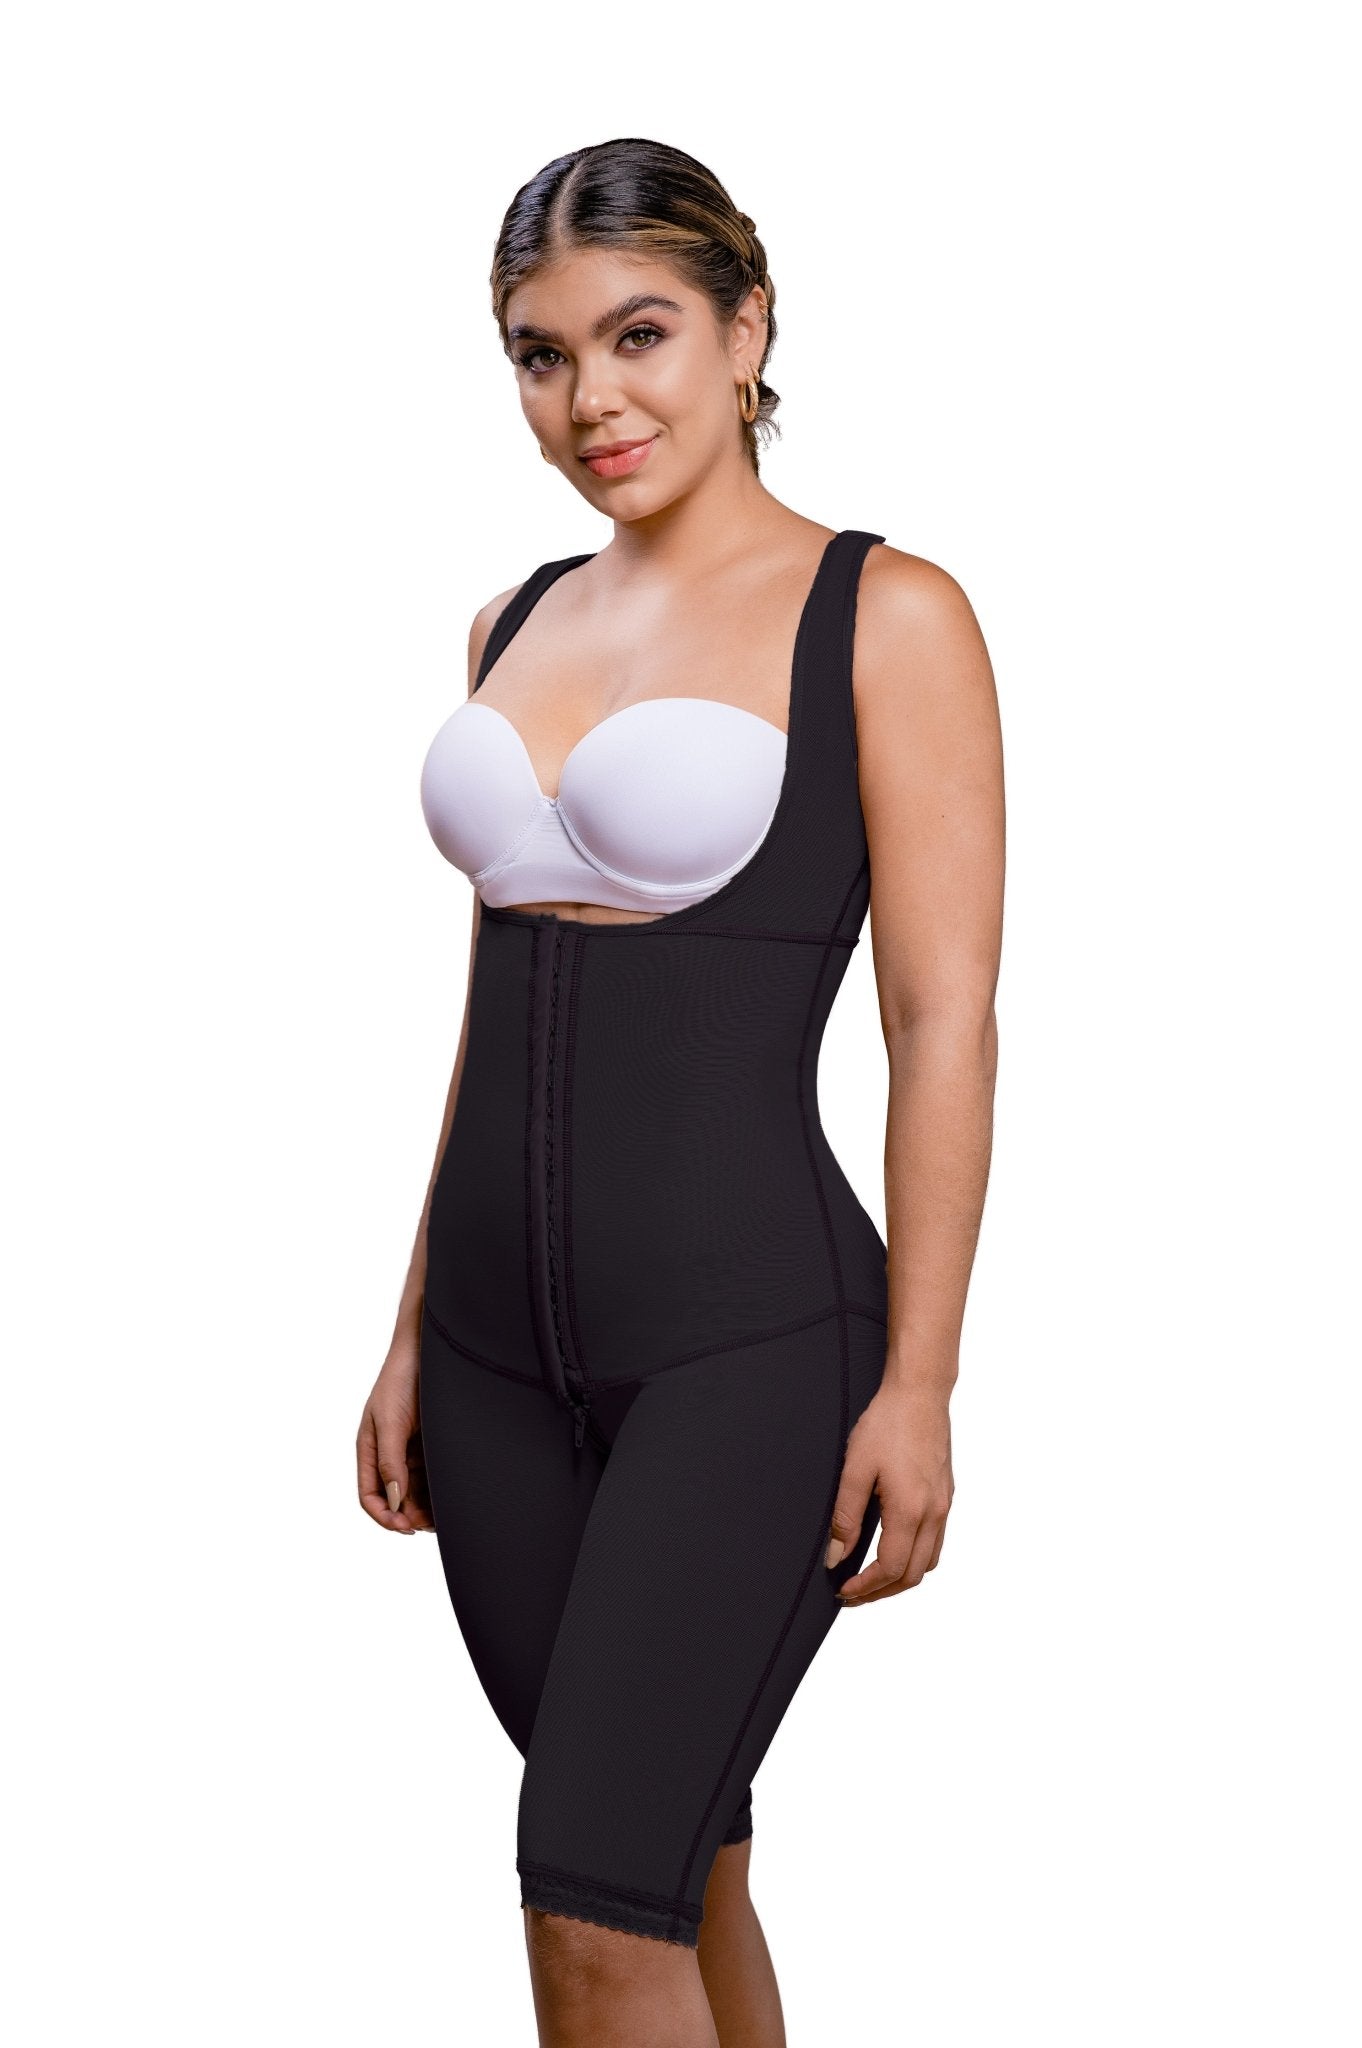 Vedette Full Body Control Suit w/ Front Closure & Back Support